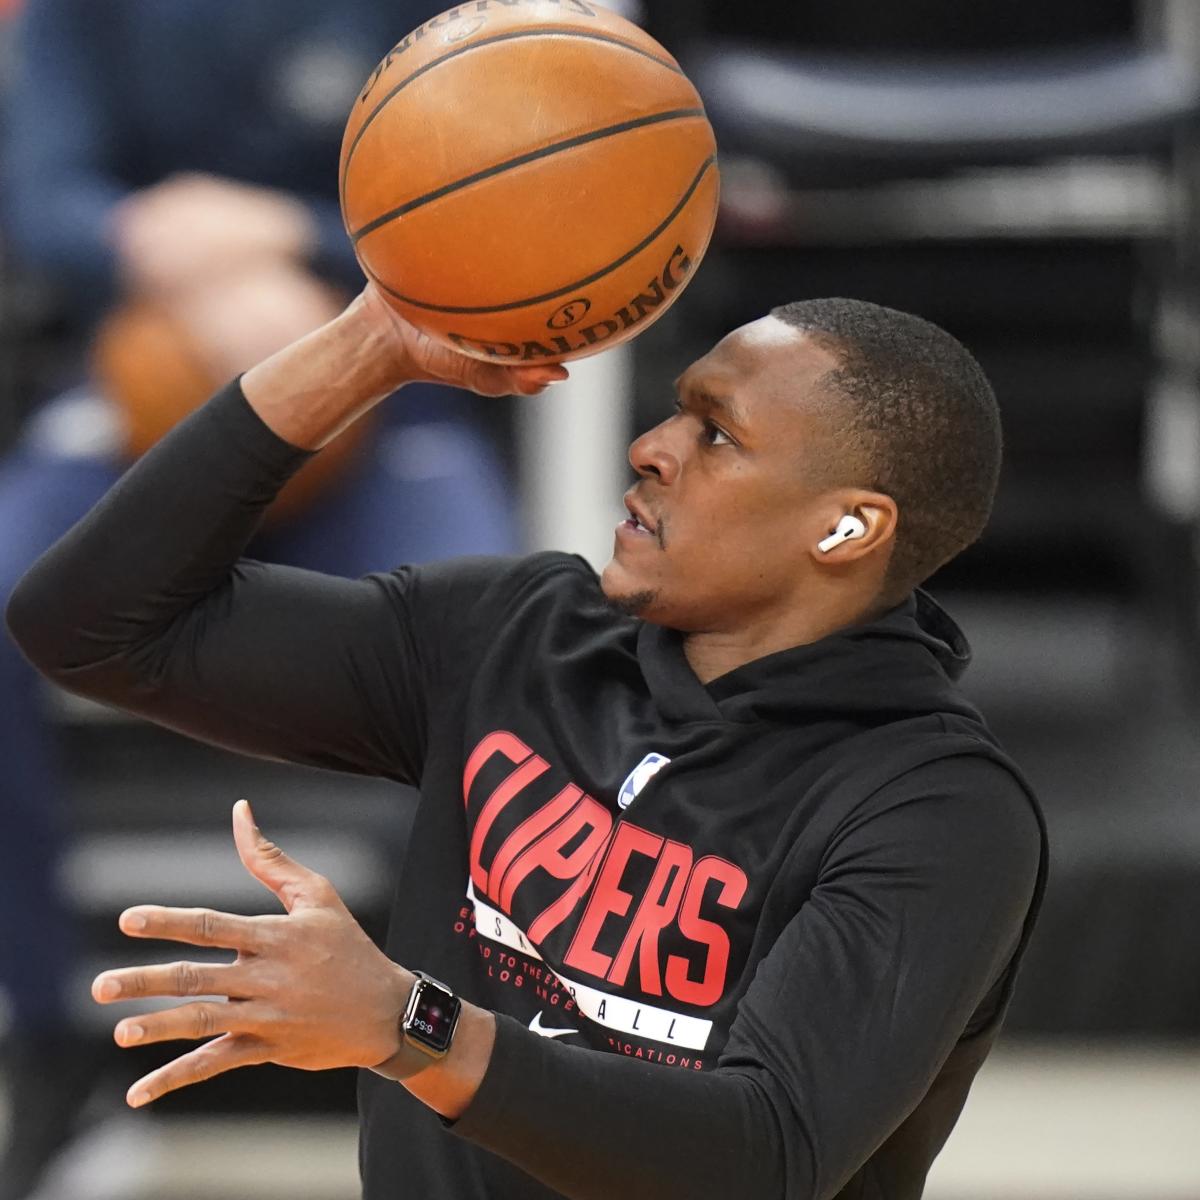 Lakers Rumors: Rajon Rondo to Signal 1-365 days, $2.6M Contract After Grizzlies Exit